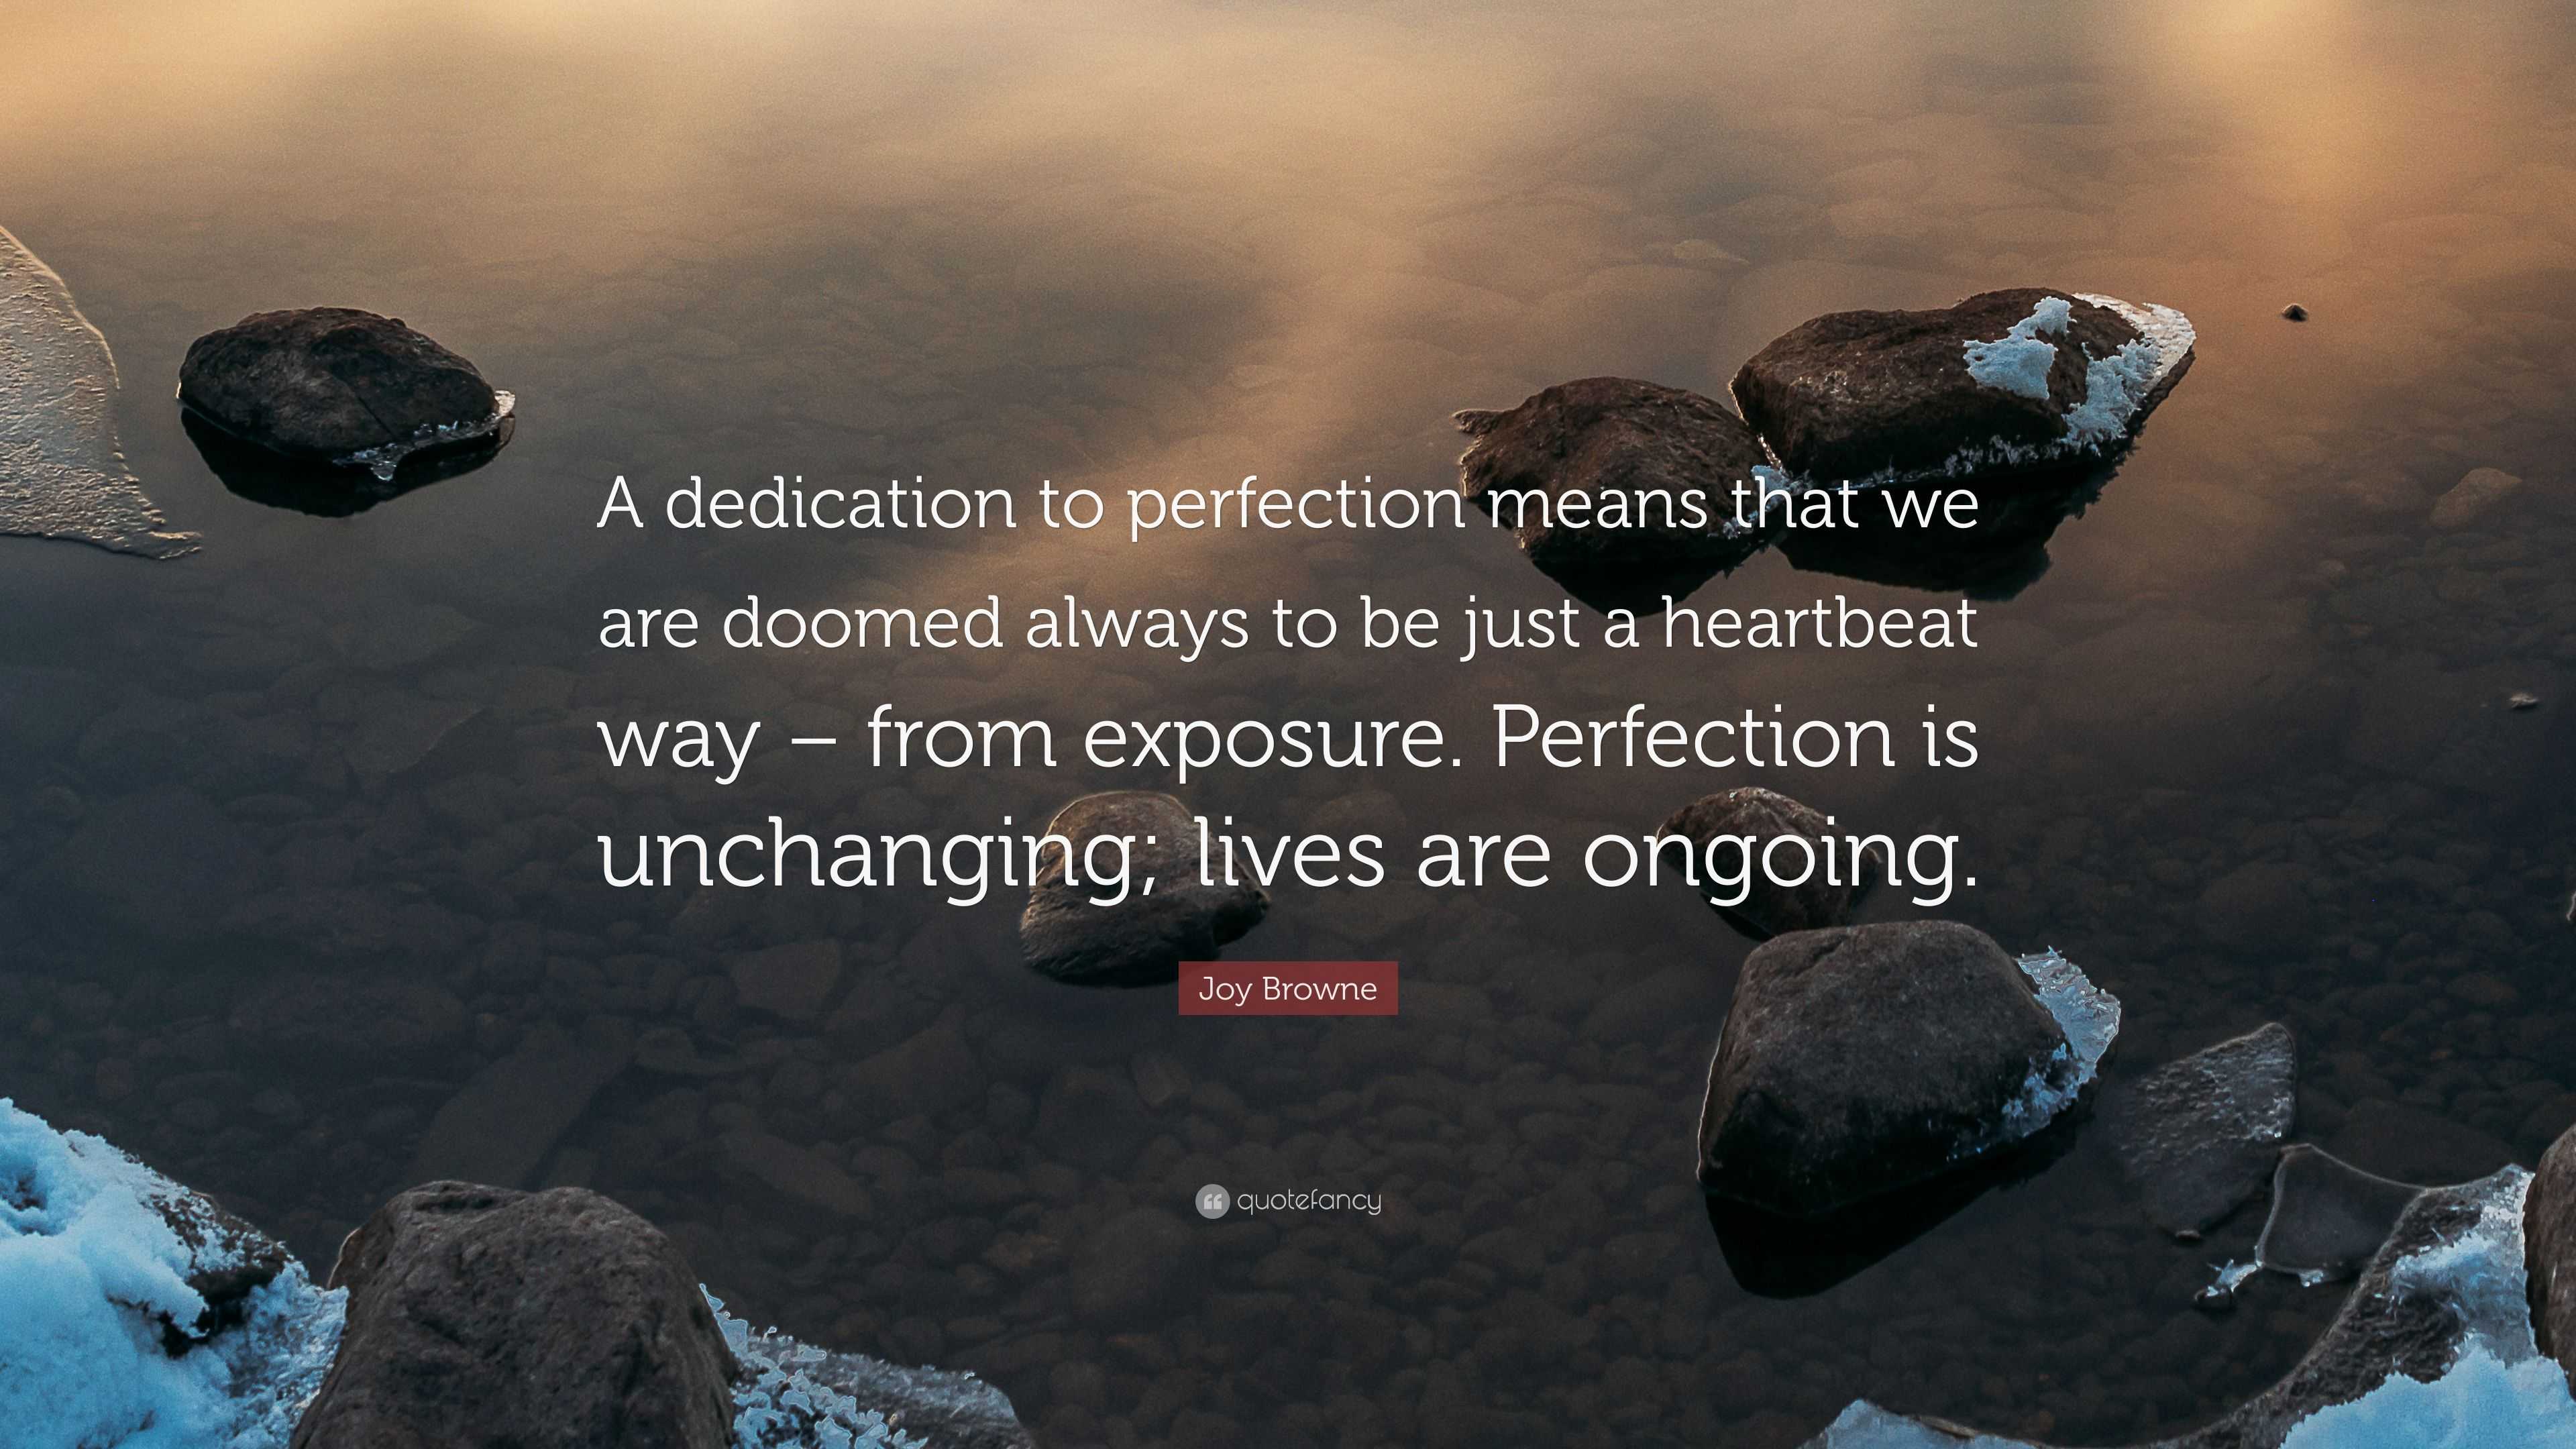 Joy Browne Quote: “A dedication to perfection means that we are doomed  always to be just a heartbeat way – from exposure. Perfection is unc”